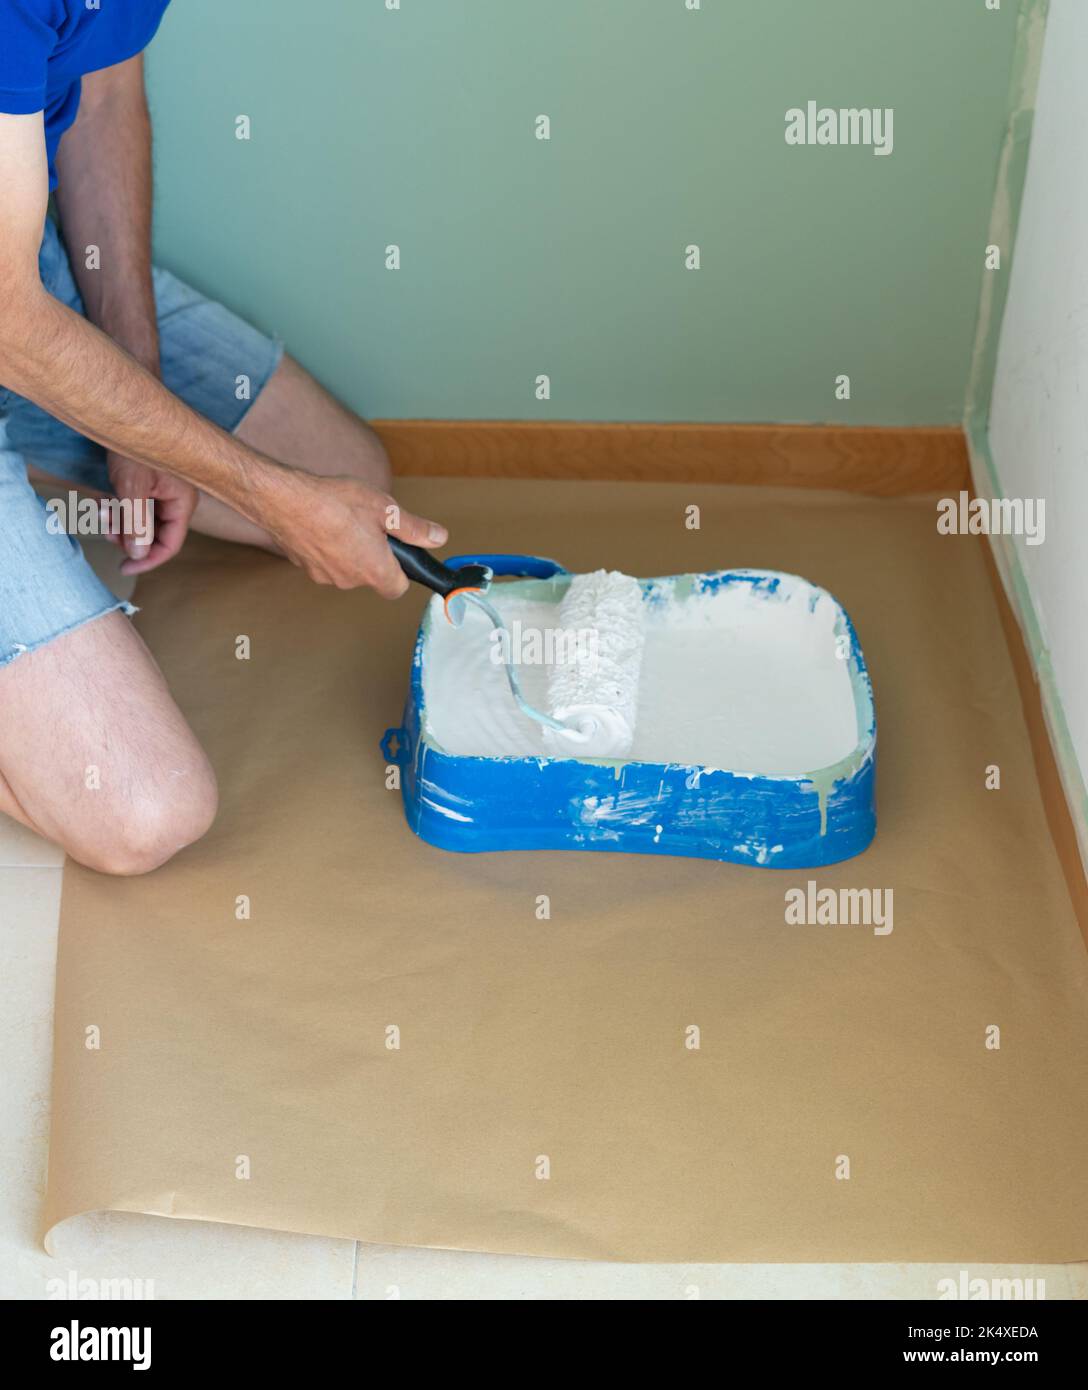 Kneeling man with roller and paint painting the wall. Painter's bucket and roller. Copy space. Stock Photo